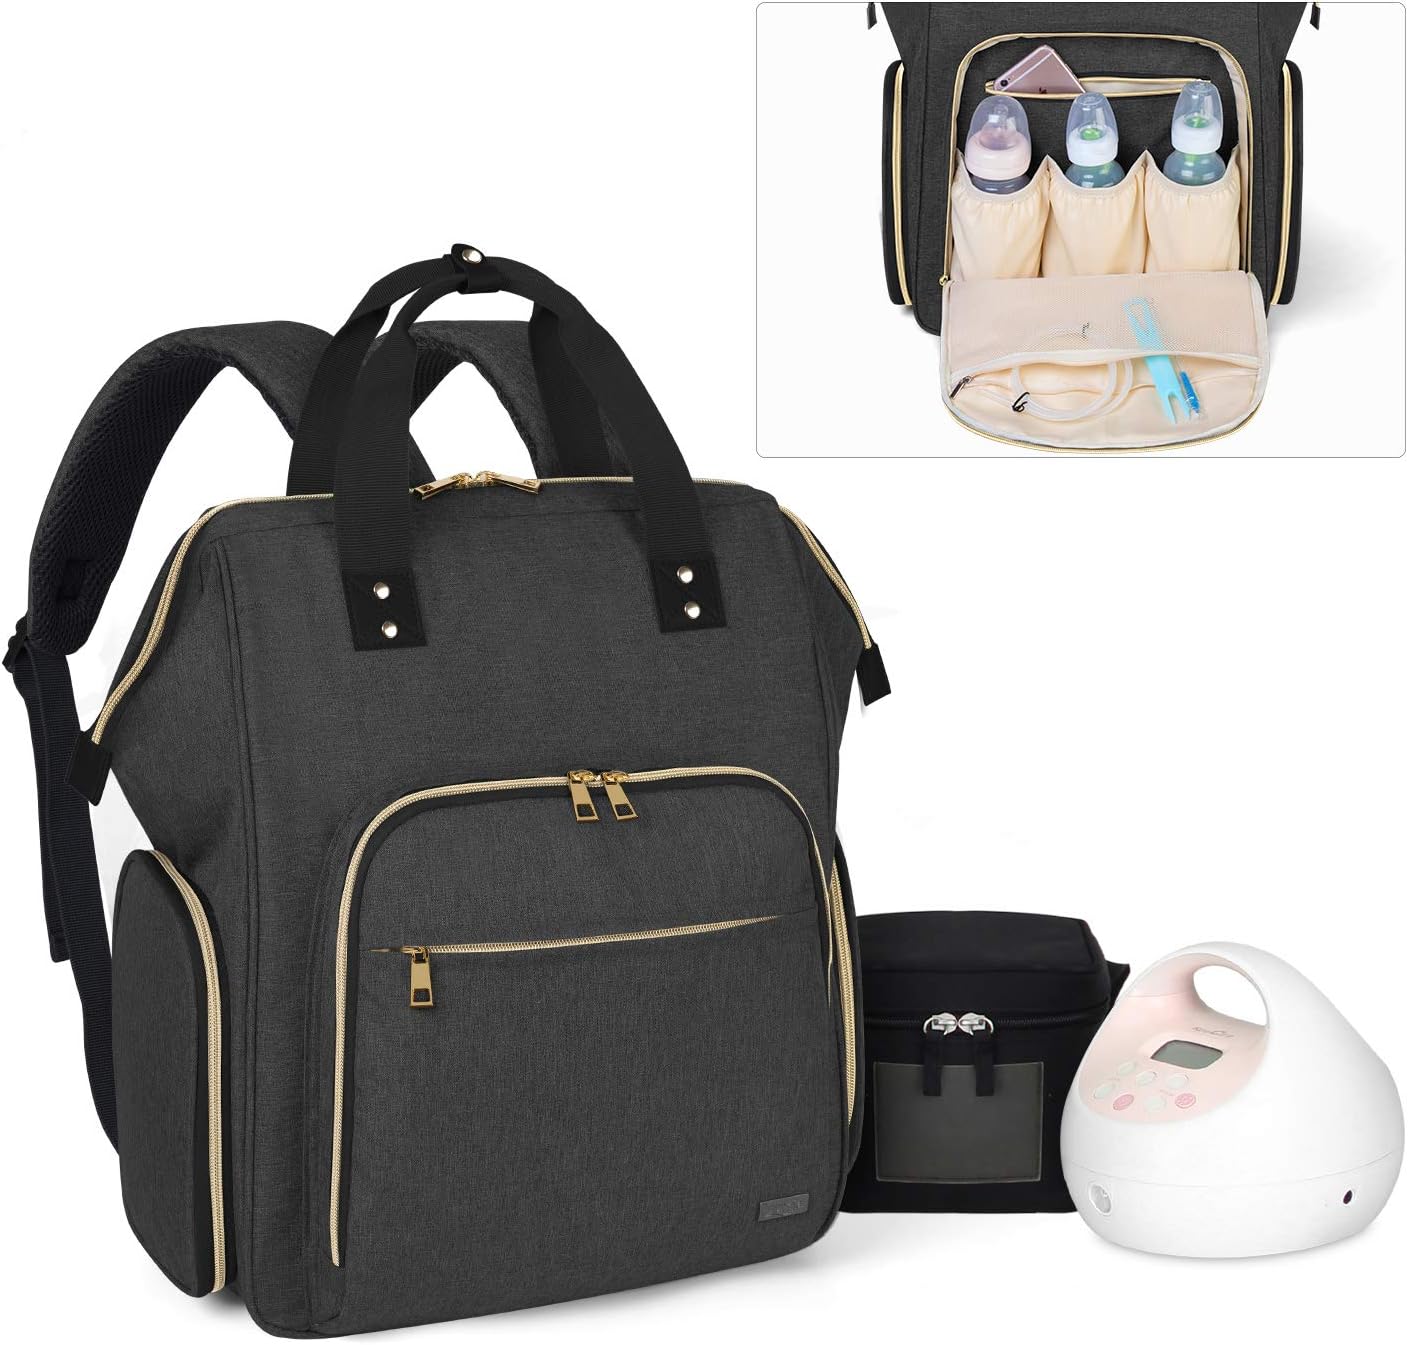 LUXJA Breast Pump Backpack with Pockets for Laptop and Cooler Bag, Pump Bag for Working Mothers